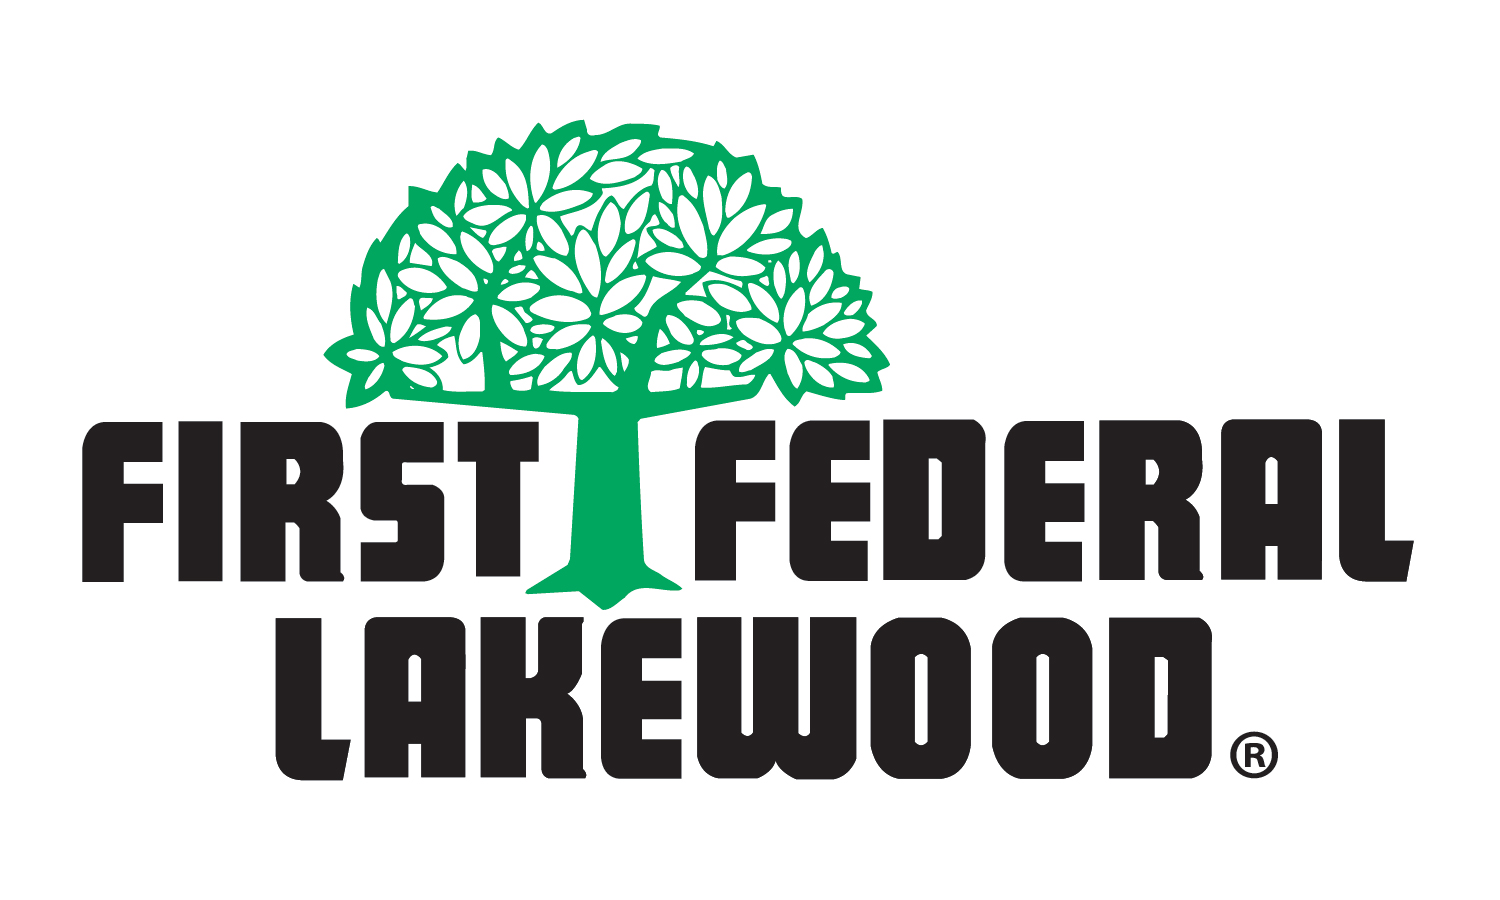 FirstFederal